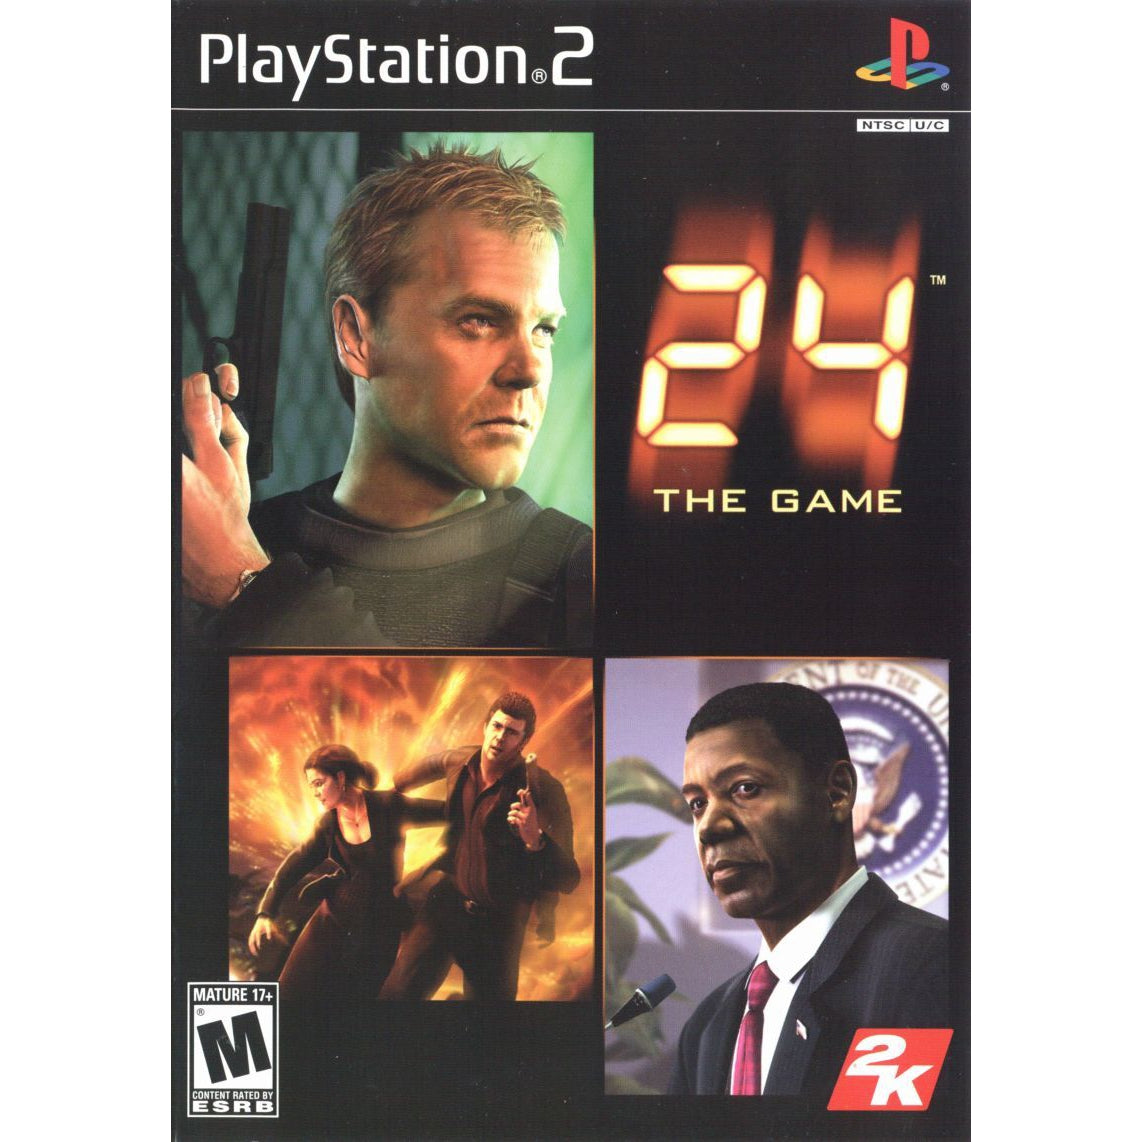 24: The Game - PlayStation 2 (PS2) Game Complete - YourGamingShop.com - Buy, Sell, Trade Video Games Online. 120 Day Warranty. Satisfaction Guaranteed.